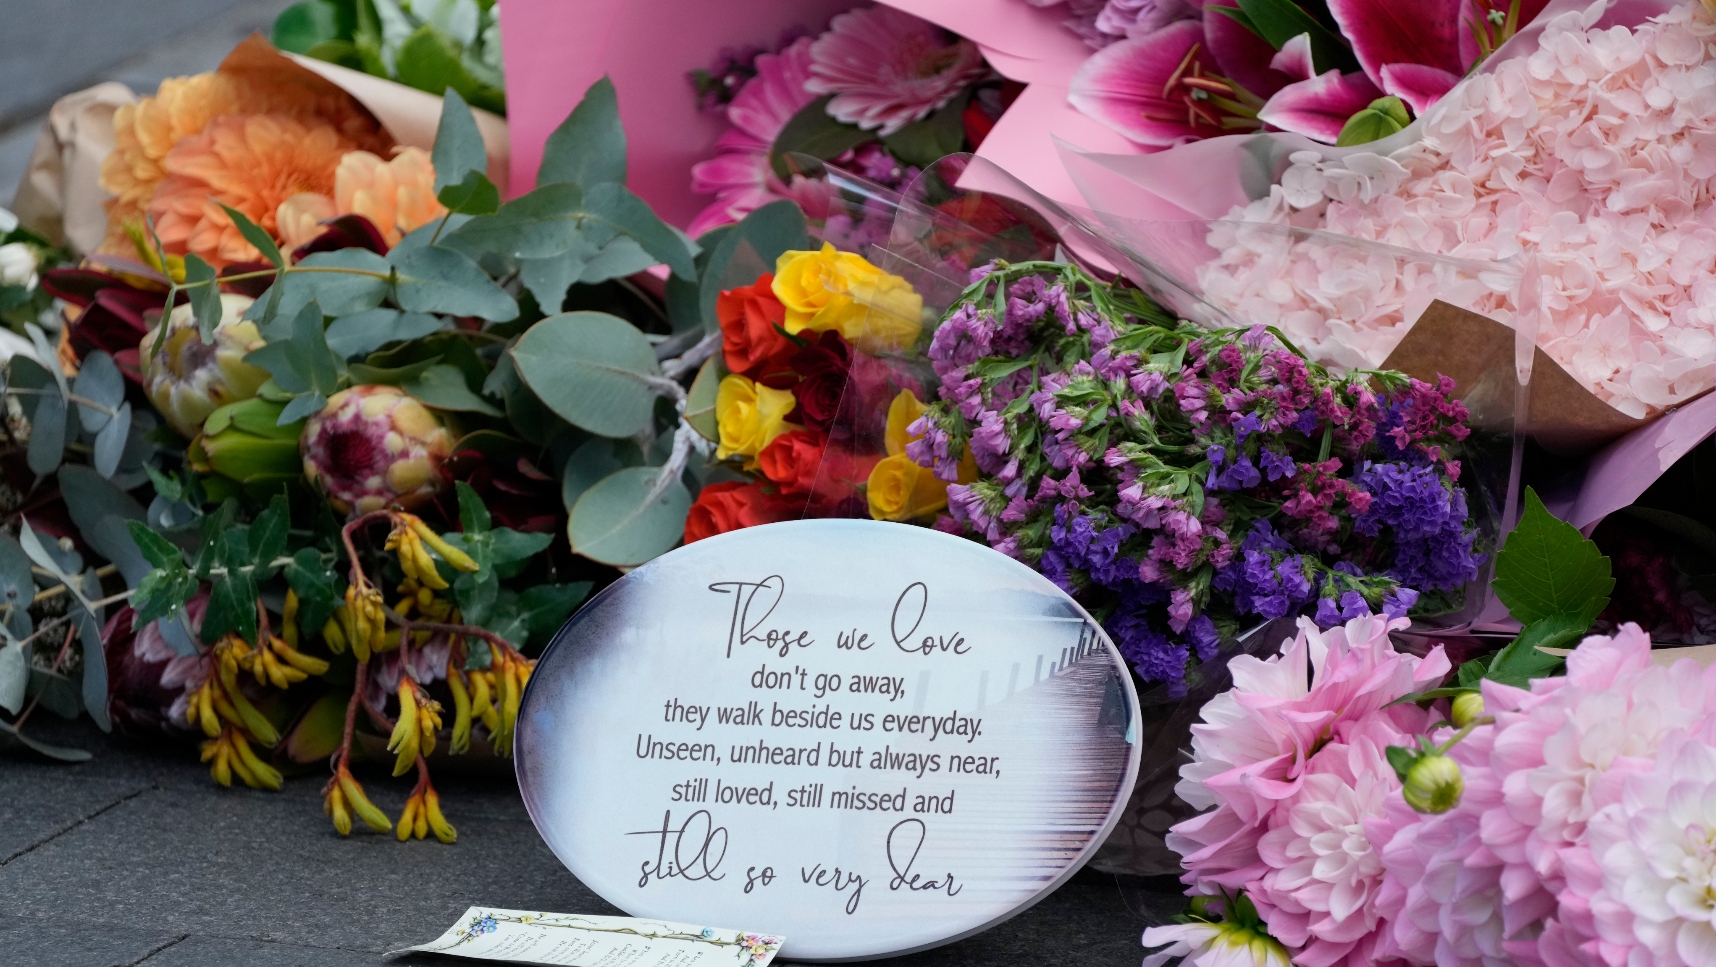 Prime Minister to lay wreath for victims of deadly Bondi Junction attack; world leaders pay tribute